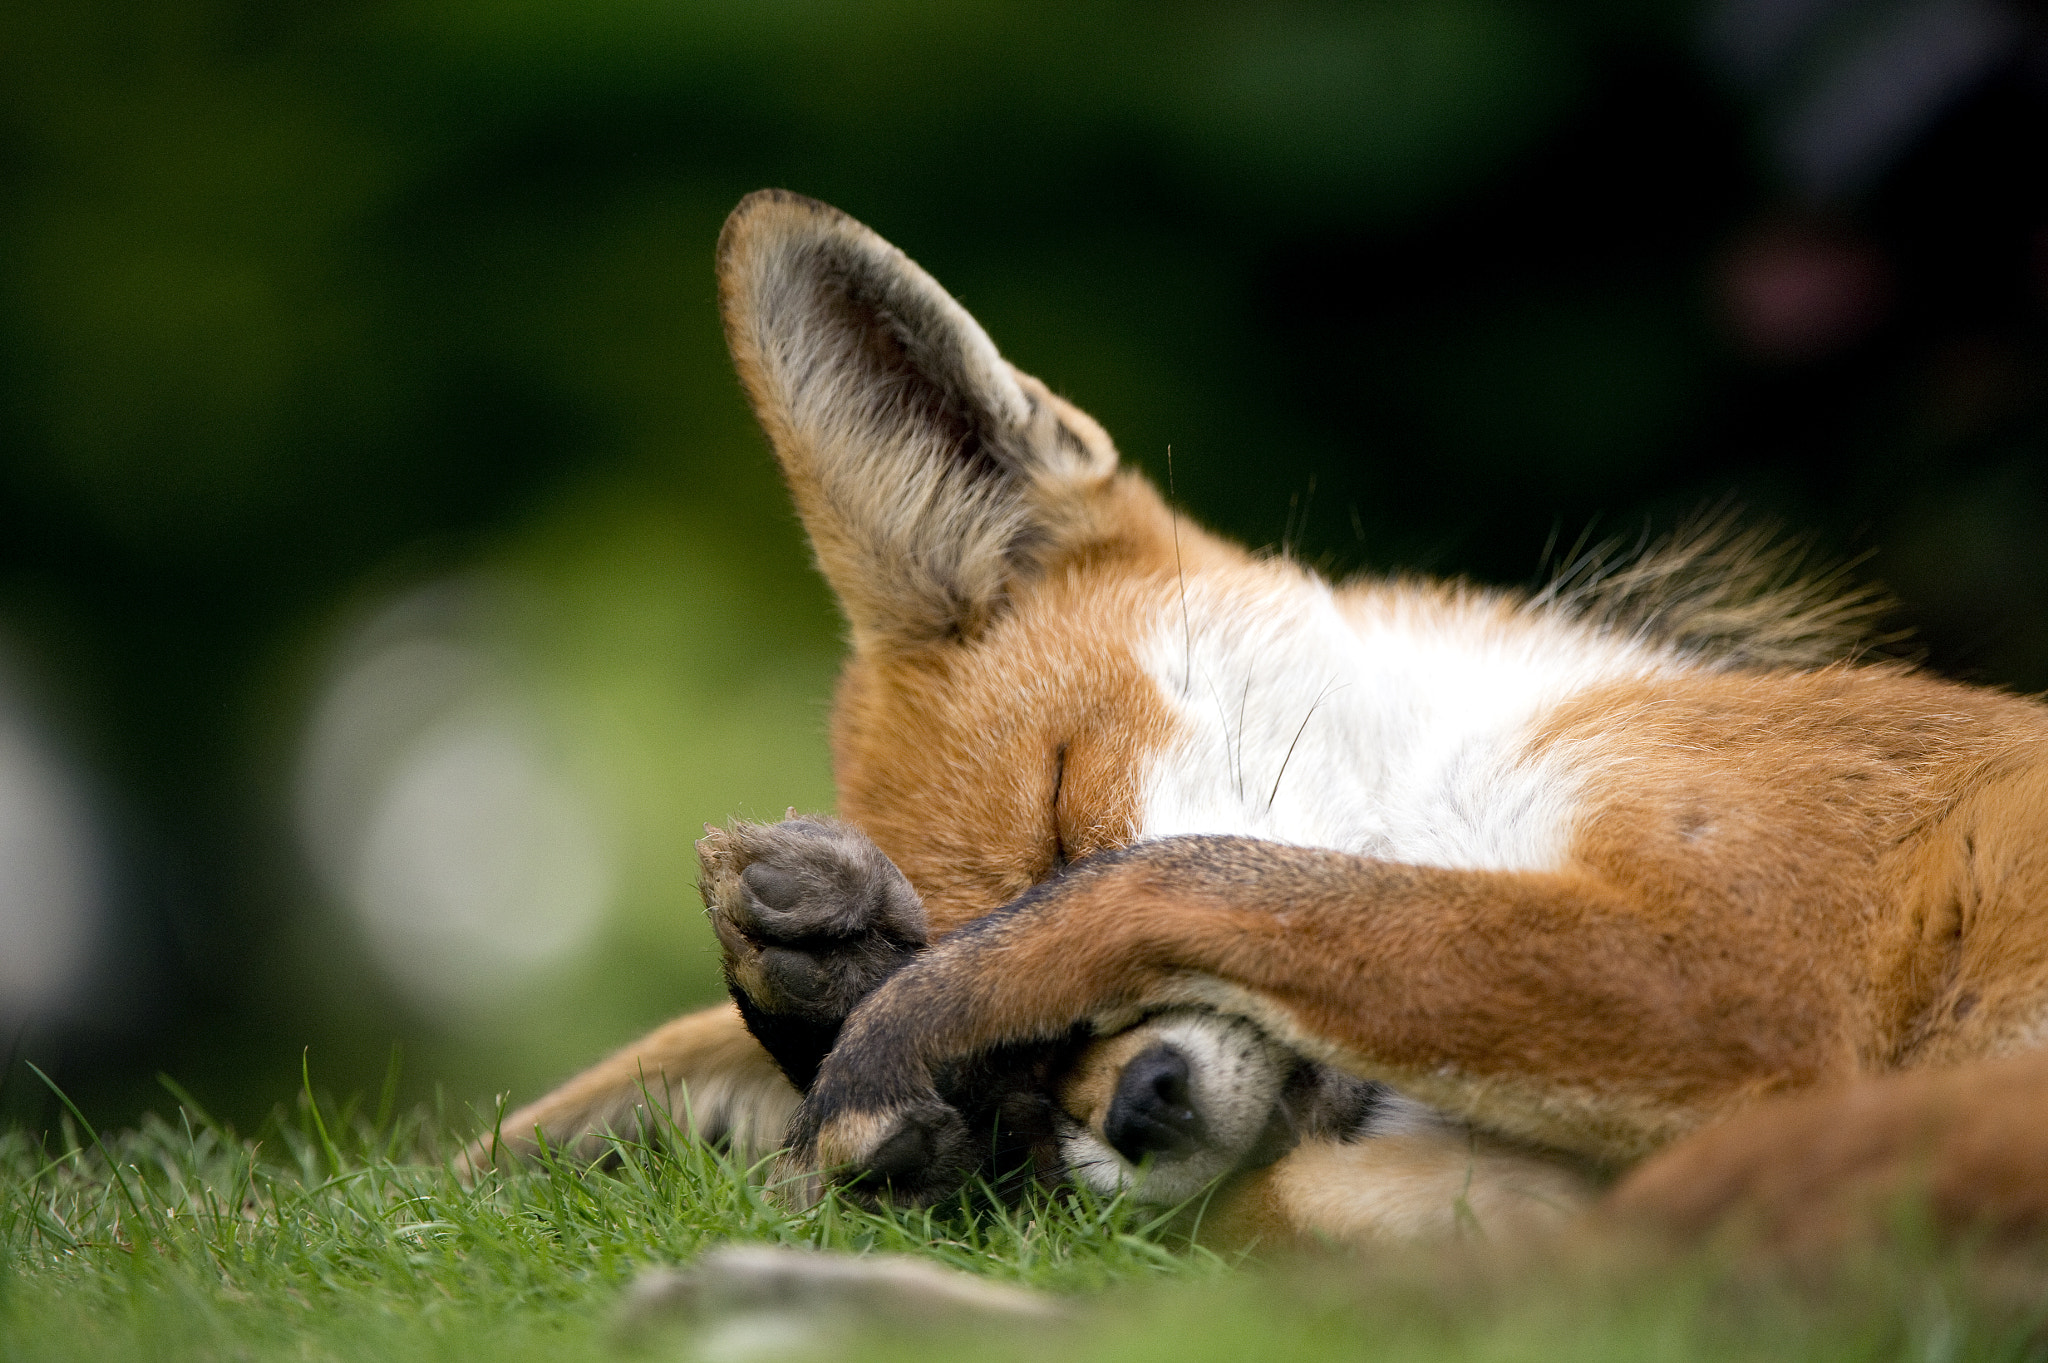 AF Zoom-Nikkor 35-105mm f/3.5-4.5 sample photo. Fox - napping photography